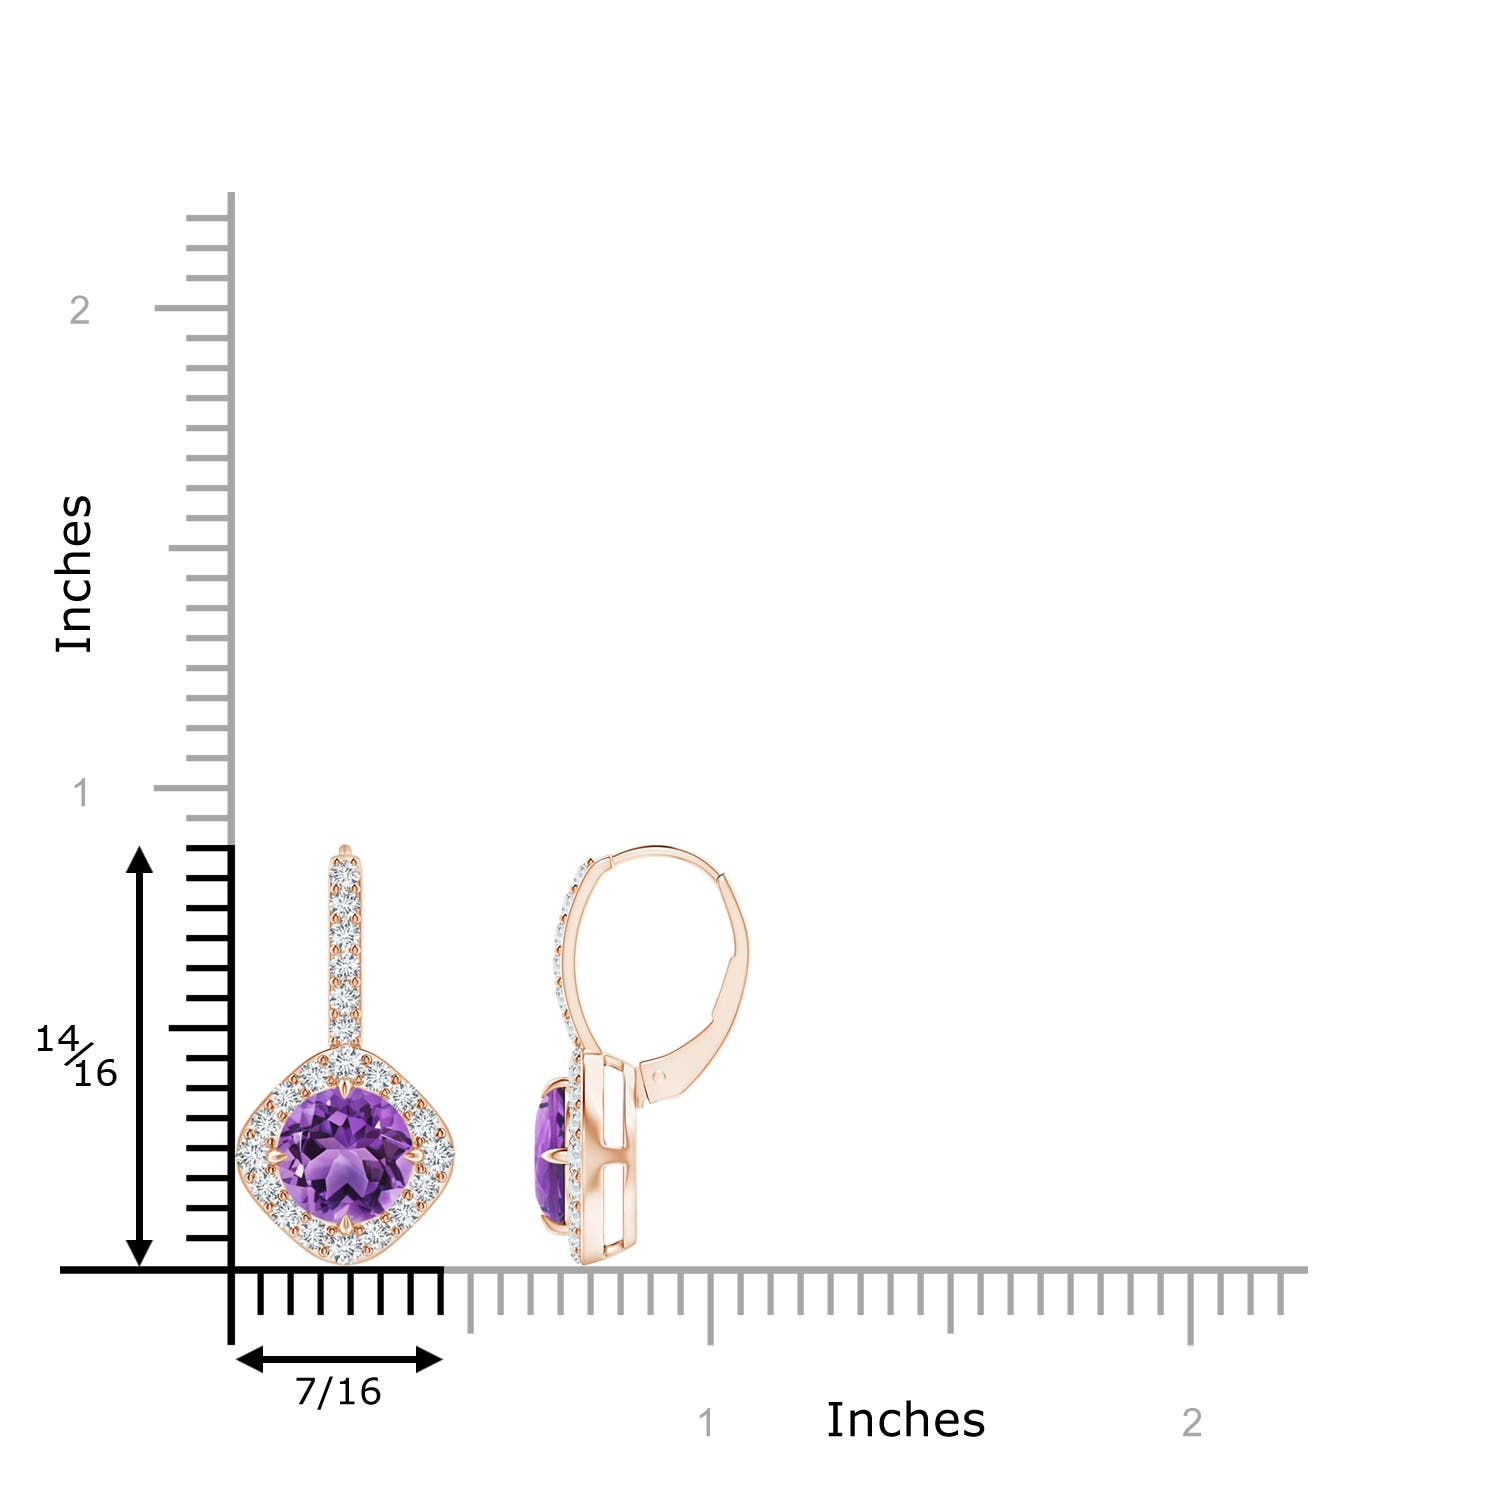 AA - Amethyst / 2.85 CT / 14 KT Rose Gold